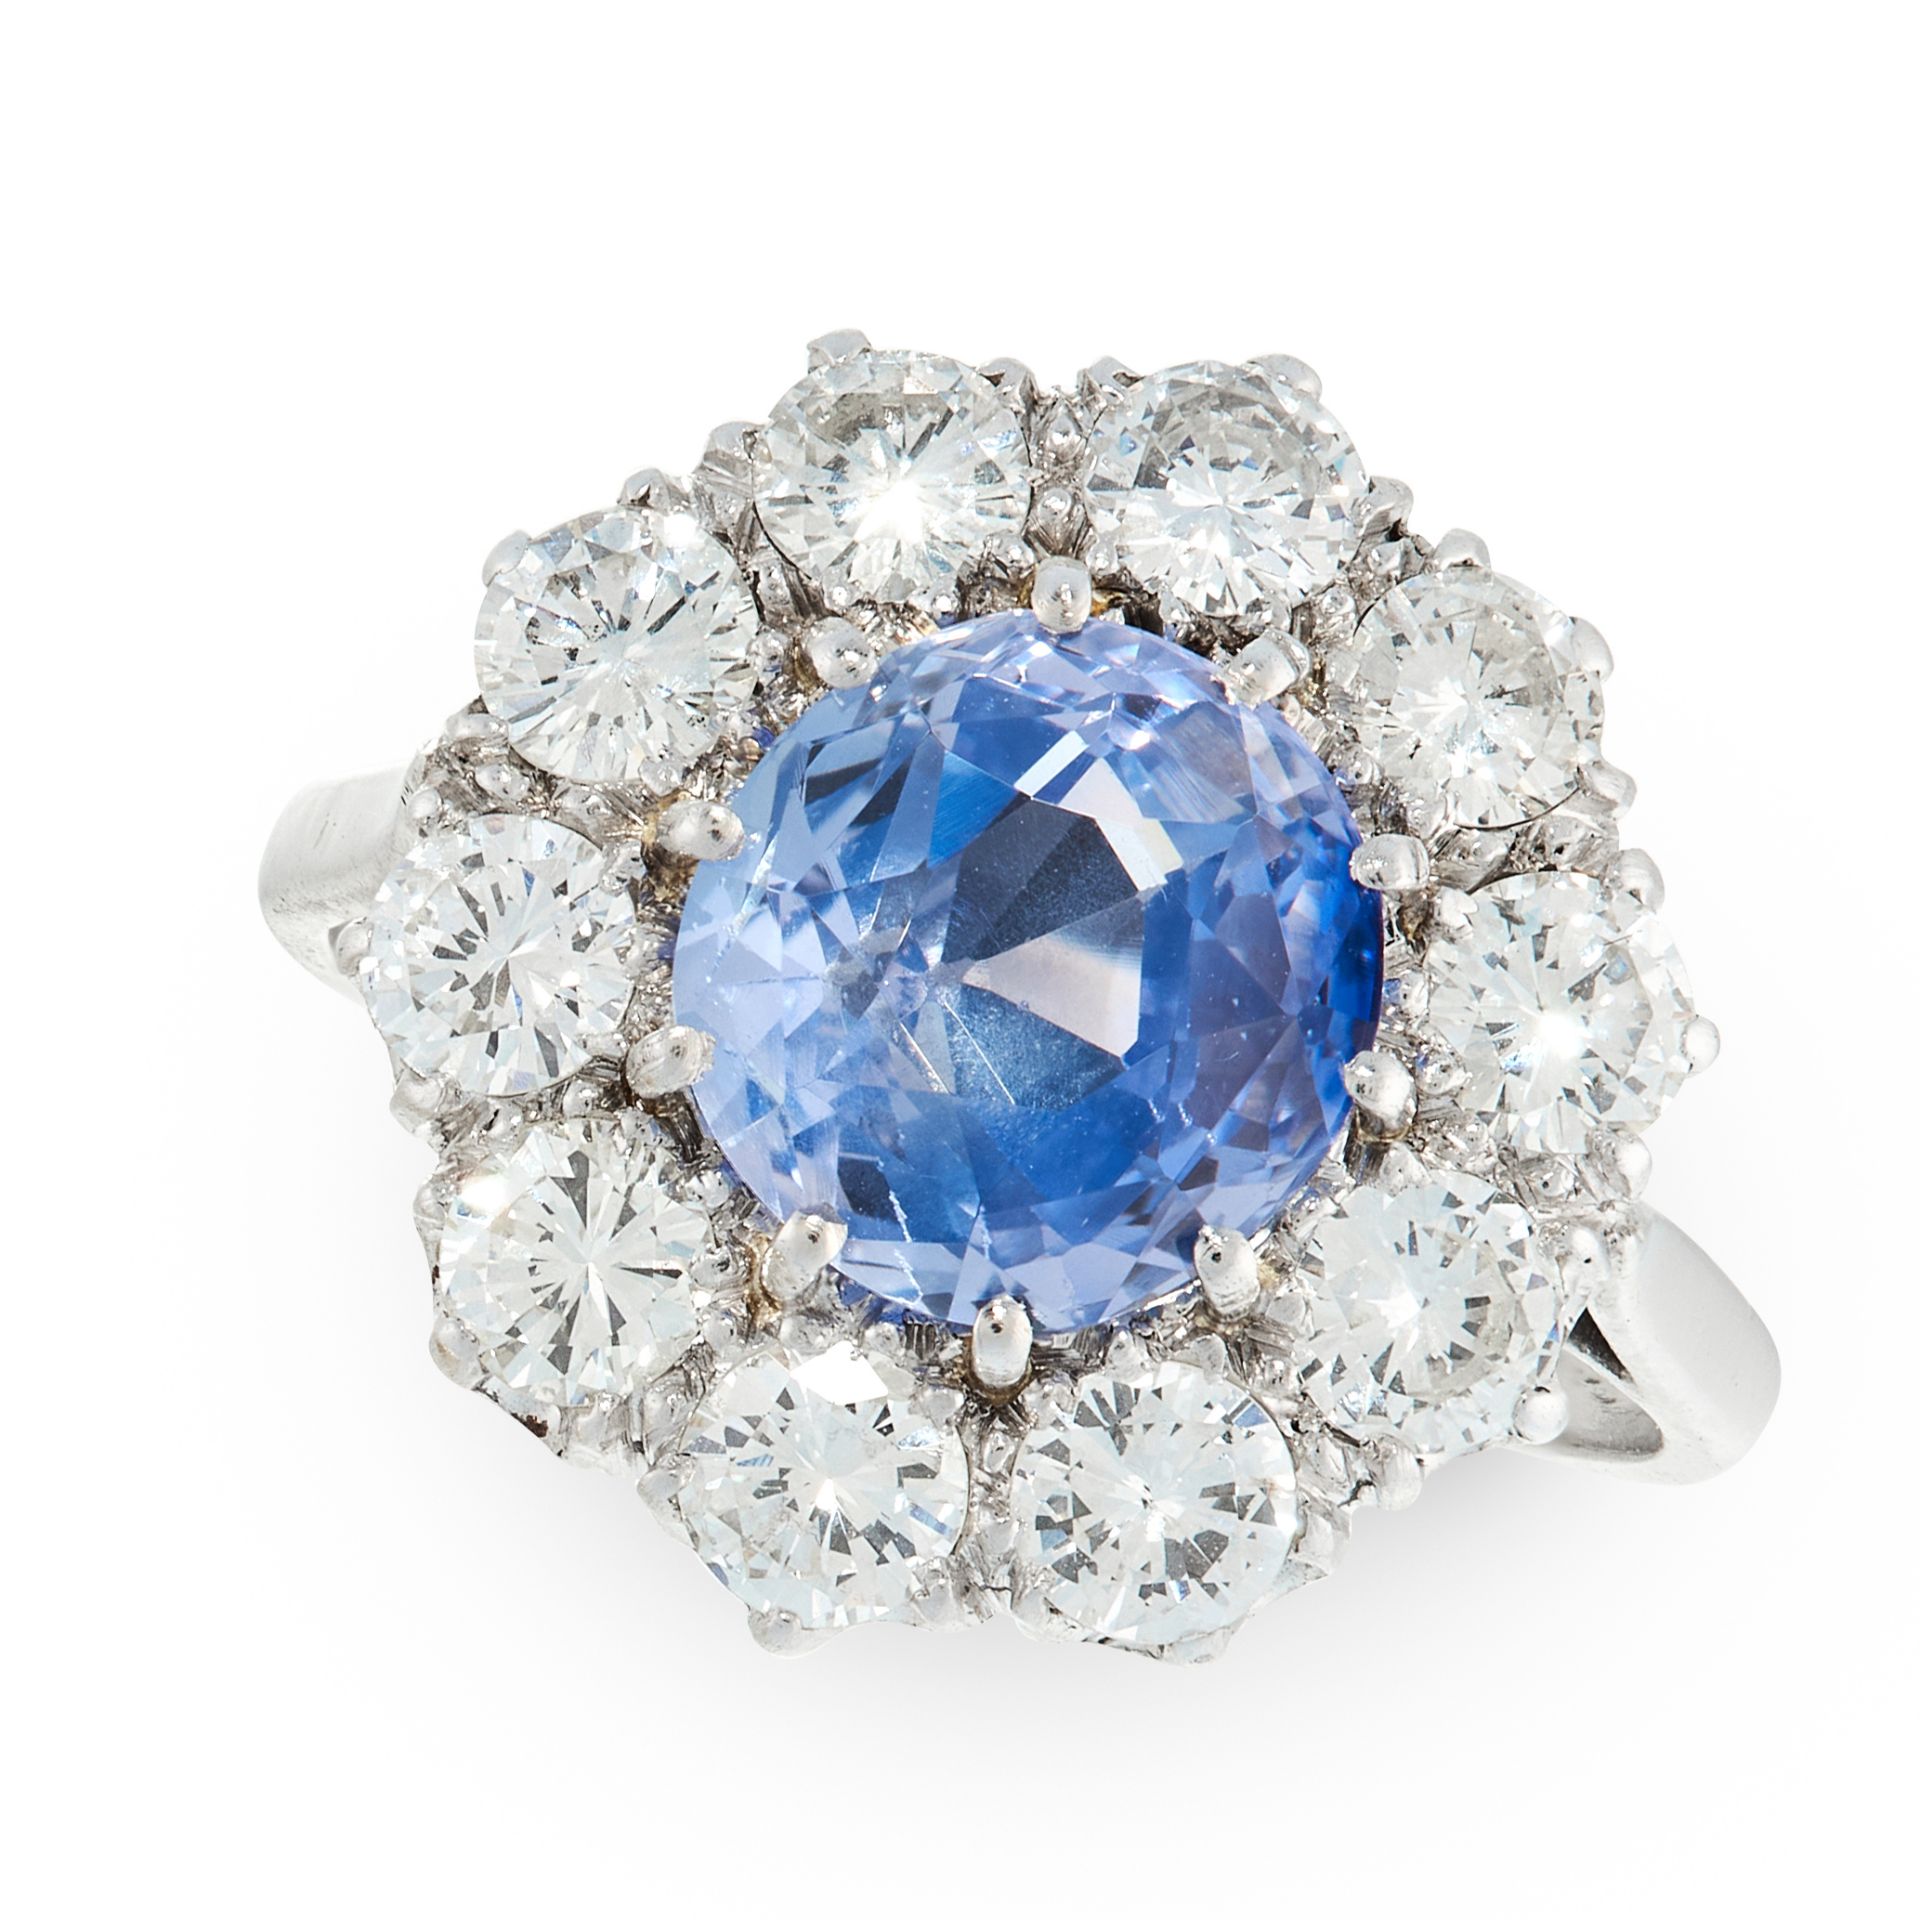 A CEYLON NO HEAT SAPPHIRE AND DIAMOND DRESS RING in 18ct white gold and platinum, set with a cushion